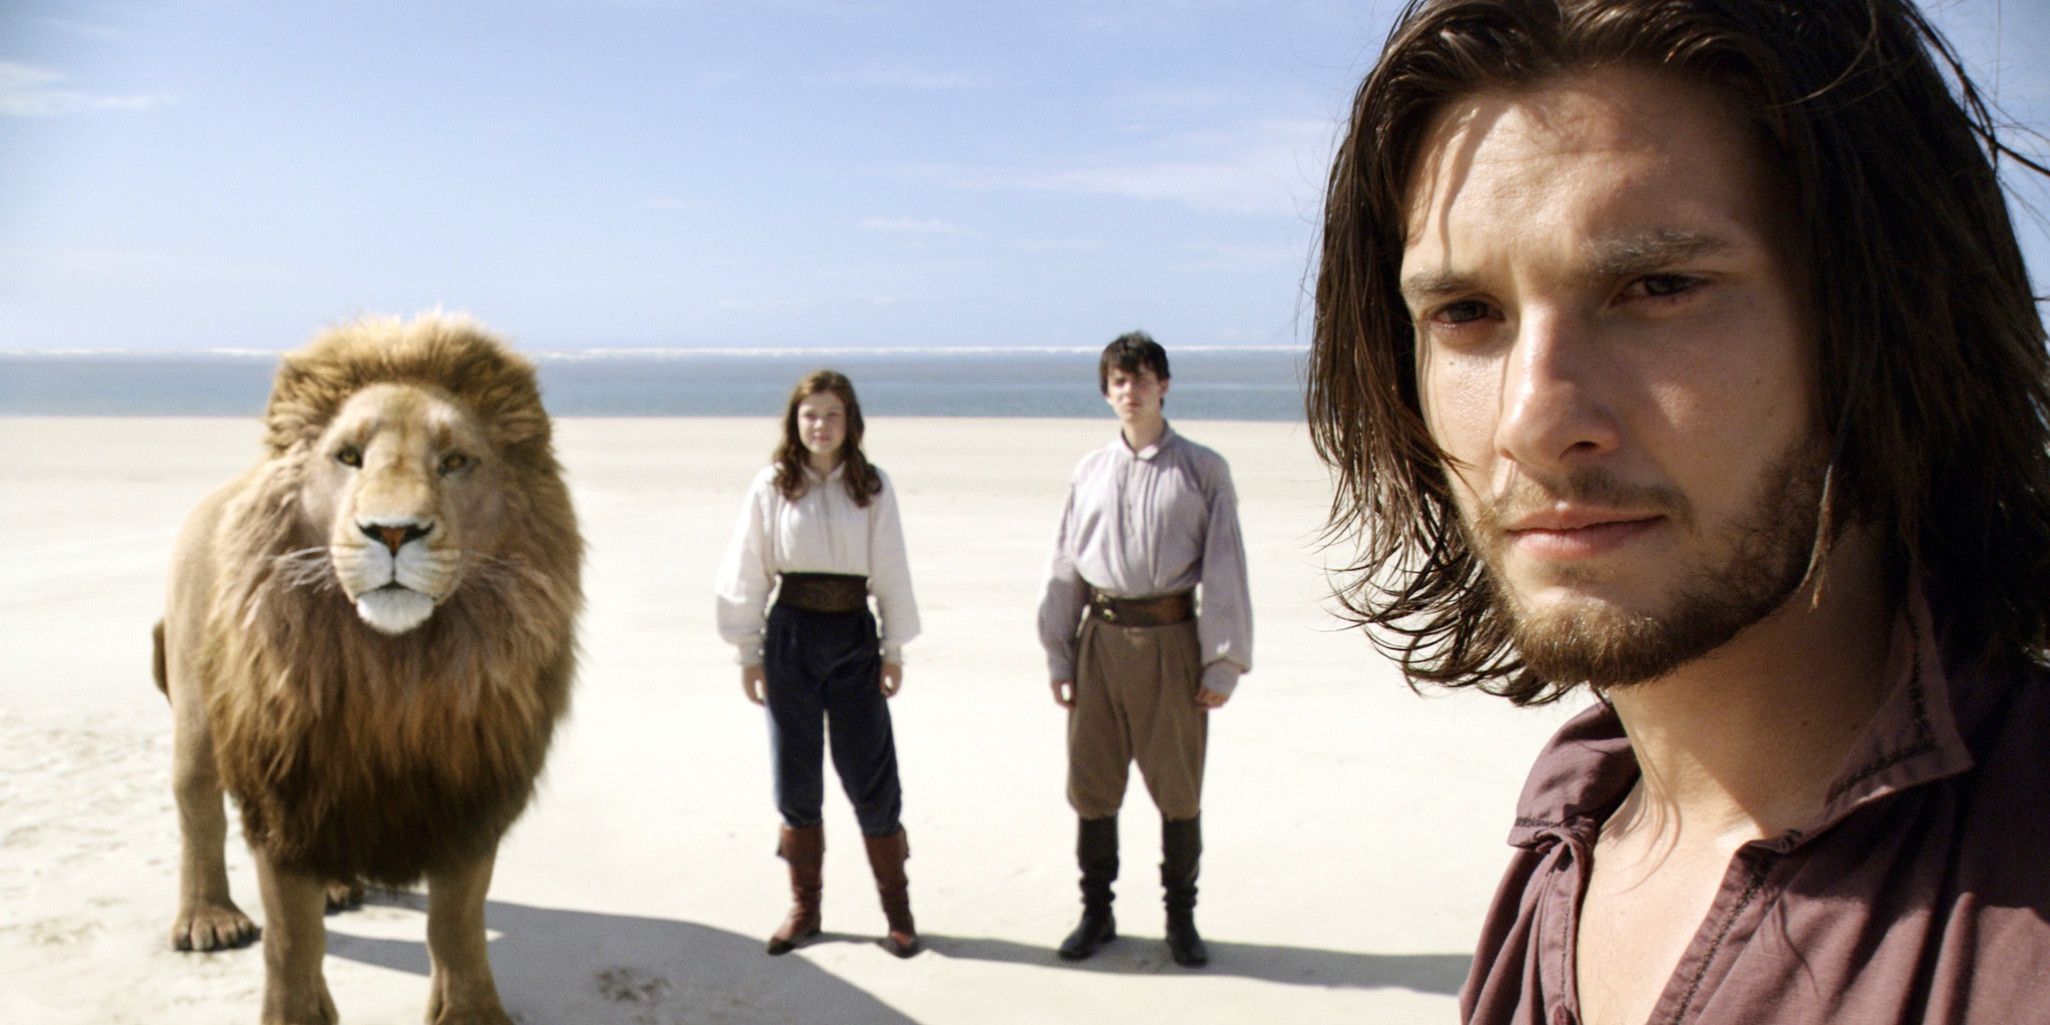 Prince Caspain stands with Aslan and 2 kids in The Chronicles of Narnia: The Voyage of the Dawn Treader